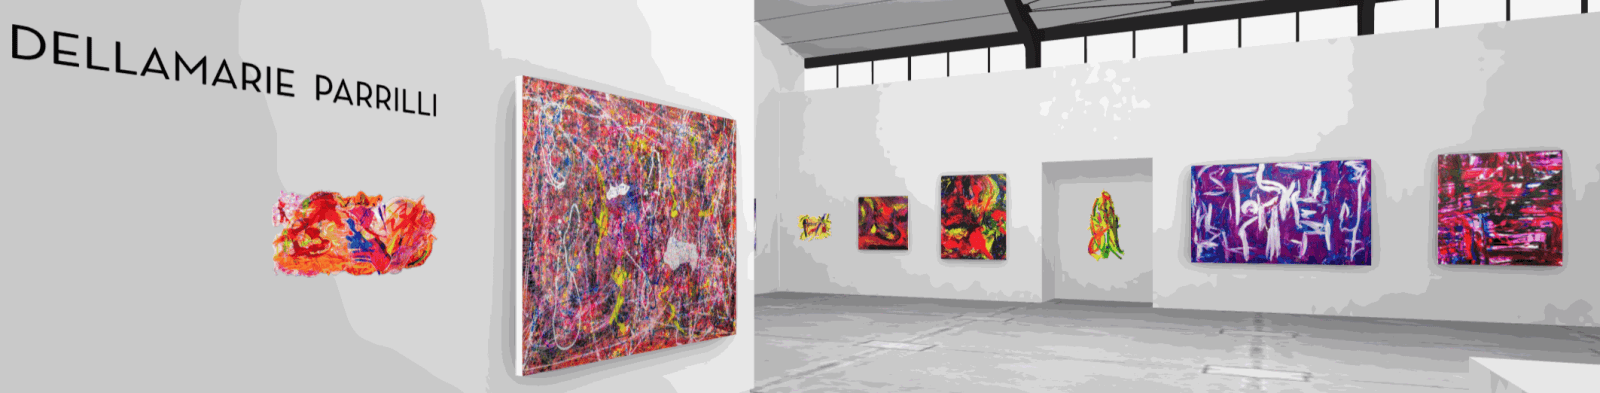 Dellamarie Parrilli: Up Close and Colorful Installation view